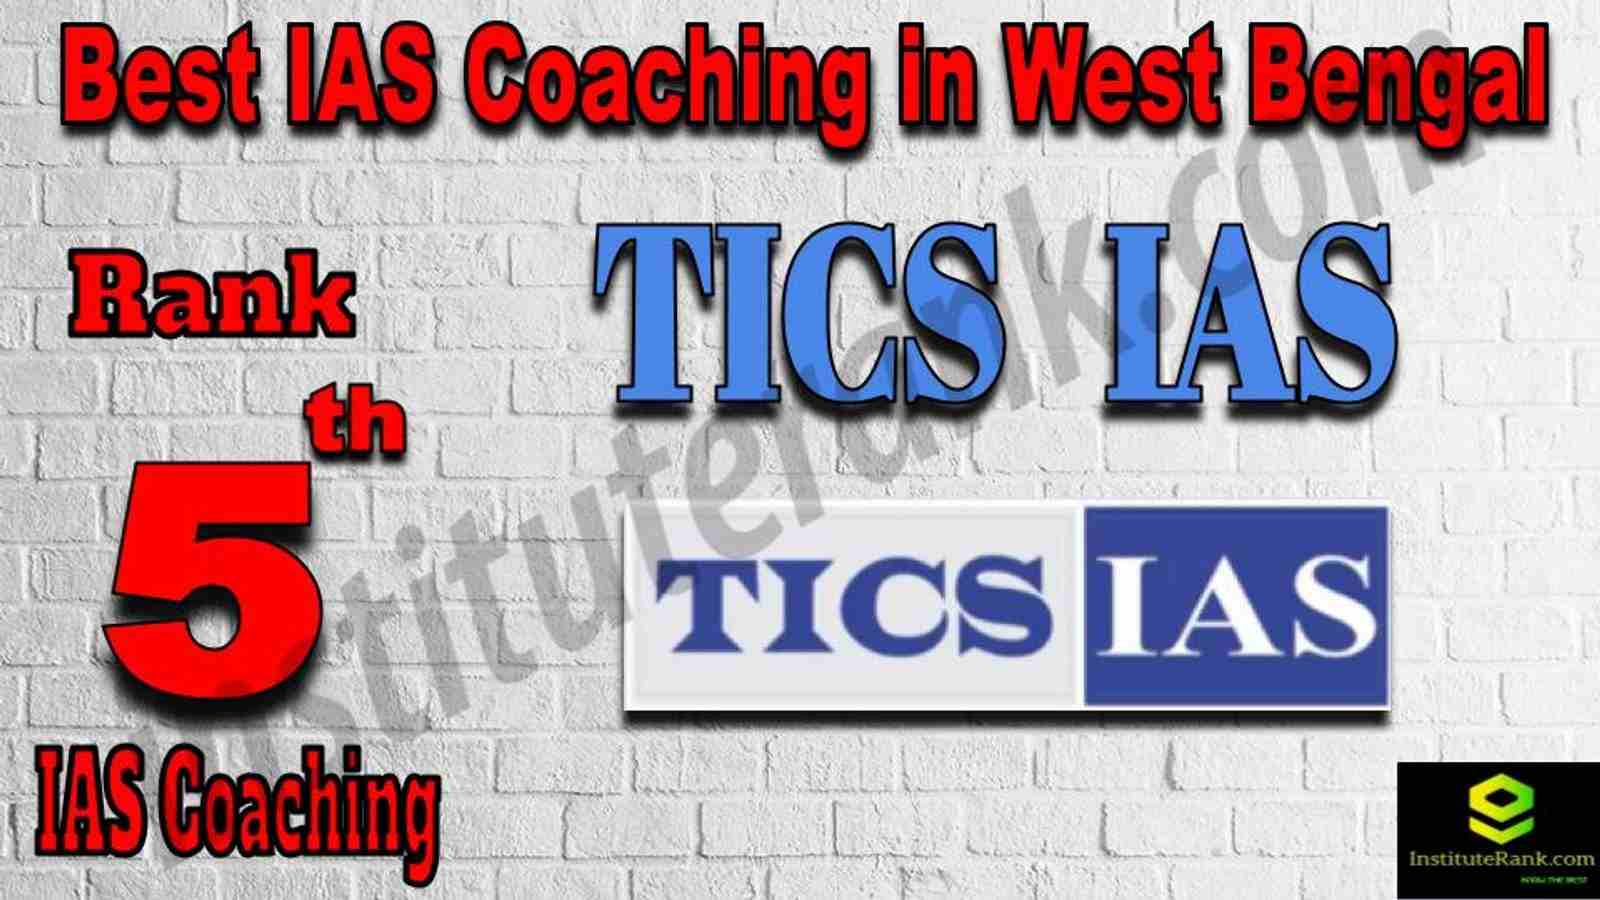 5th Best IAS Coaching in West Bengal